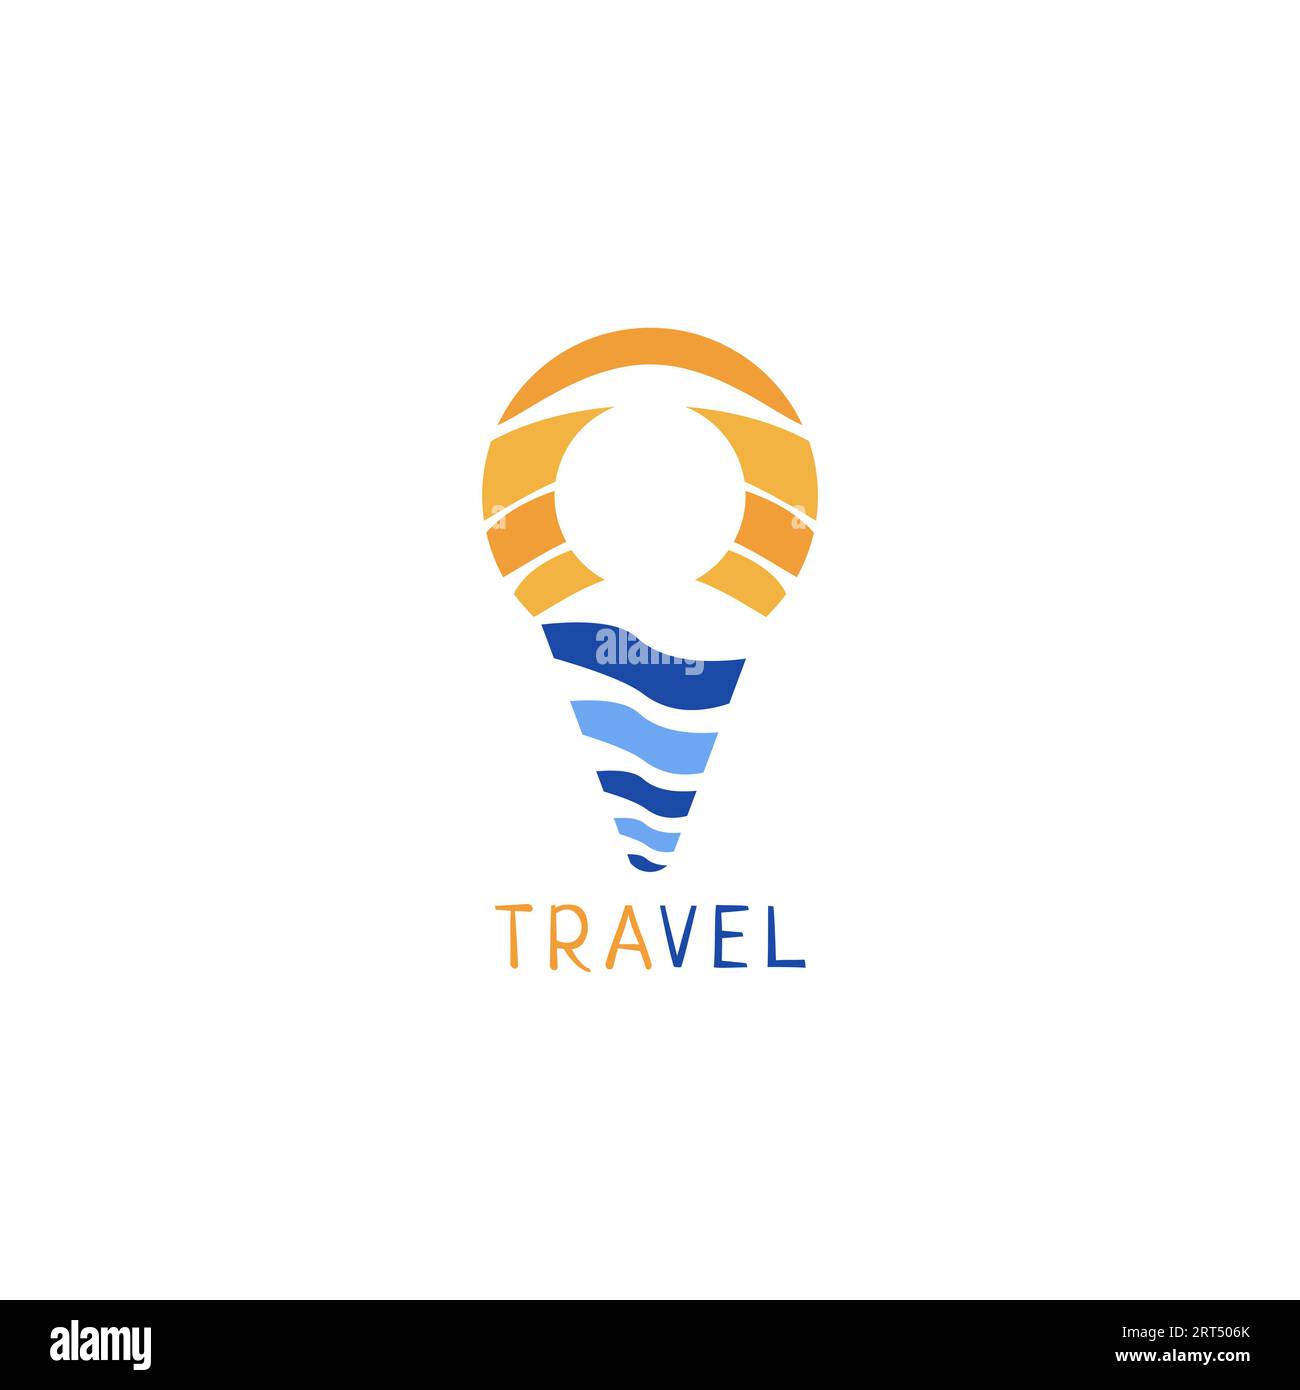 Travel logo with shapes like sea, sun, location and people. Stock Vector